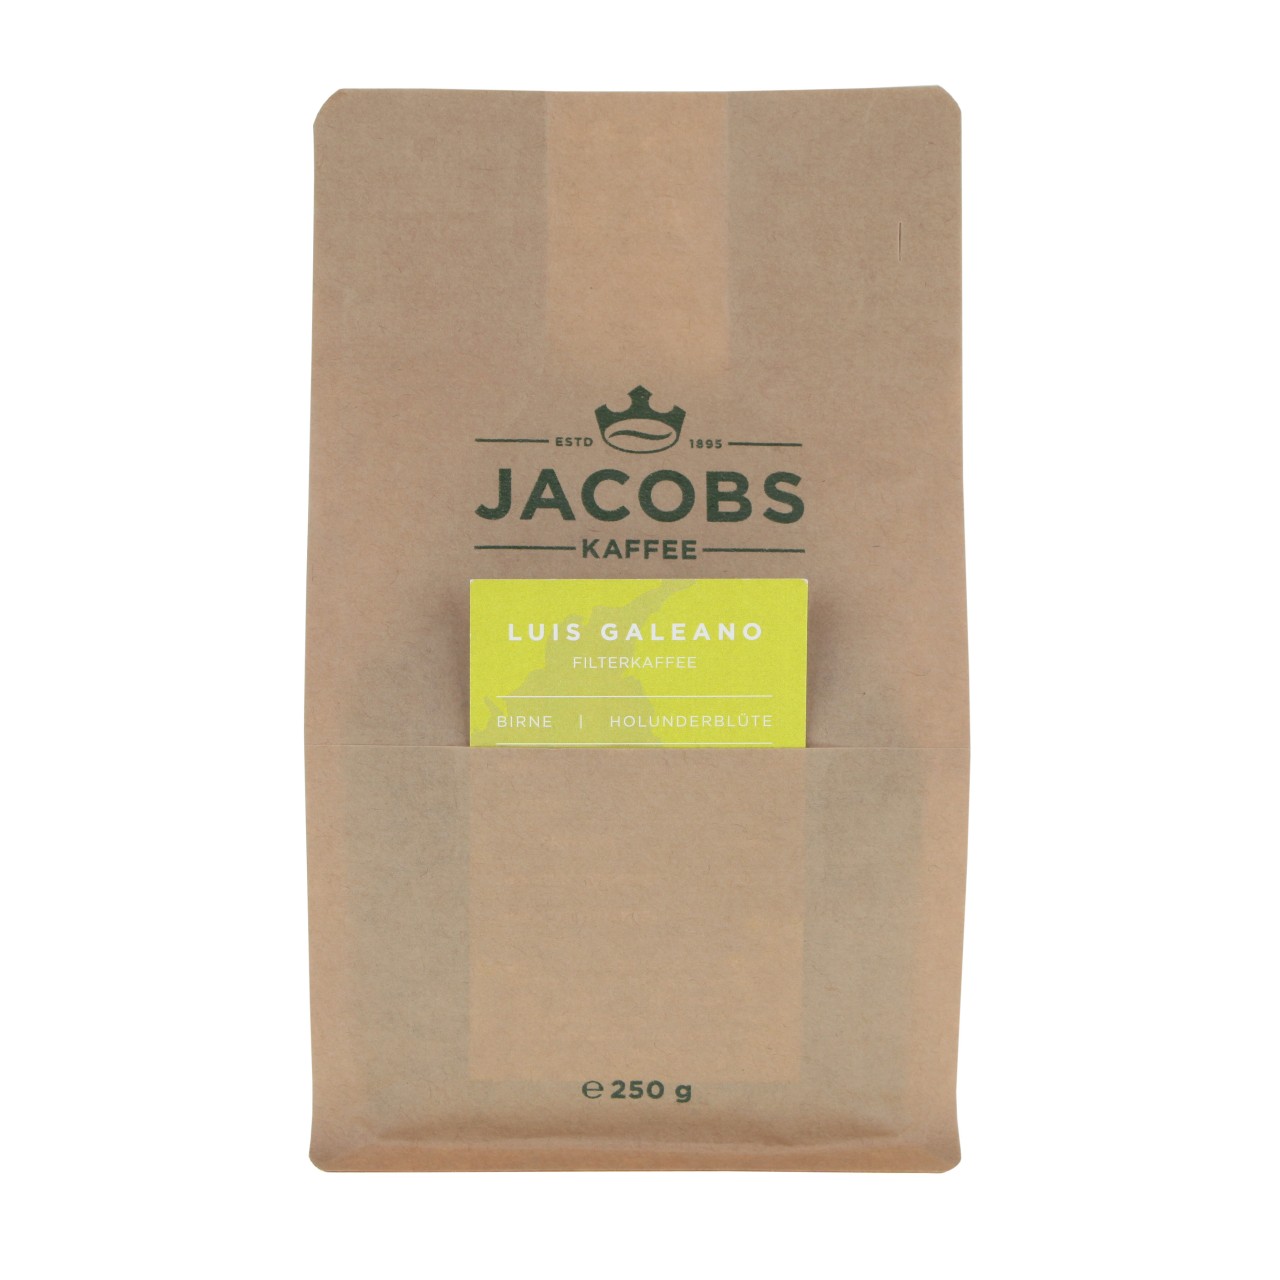 Jacobs Coffee Luis Galeano Filter Coffee